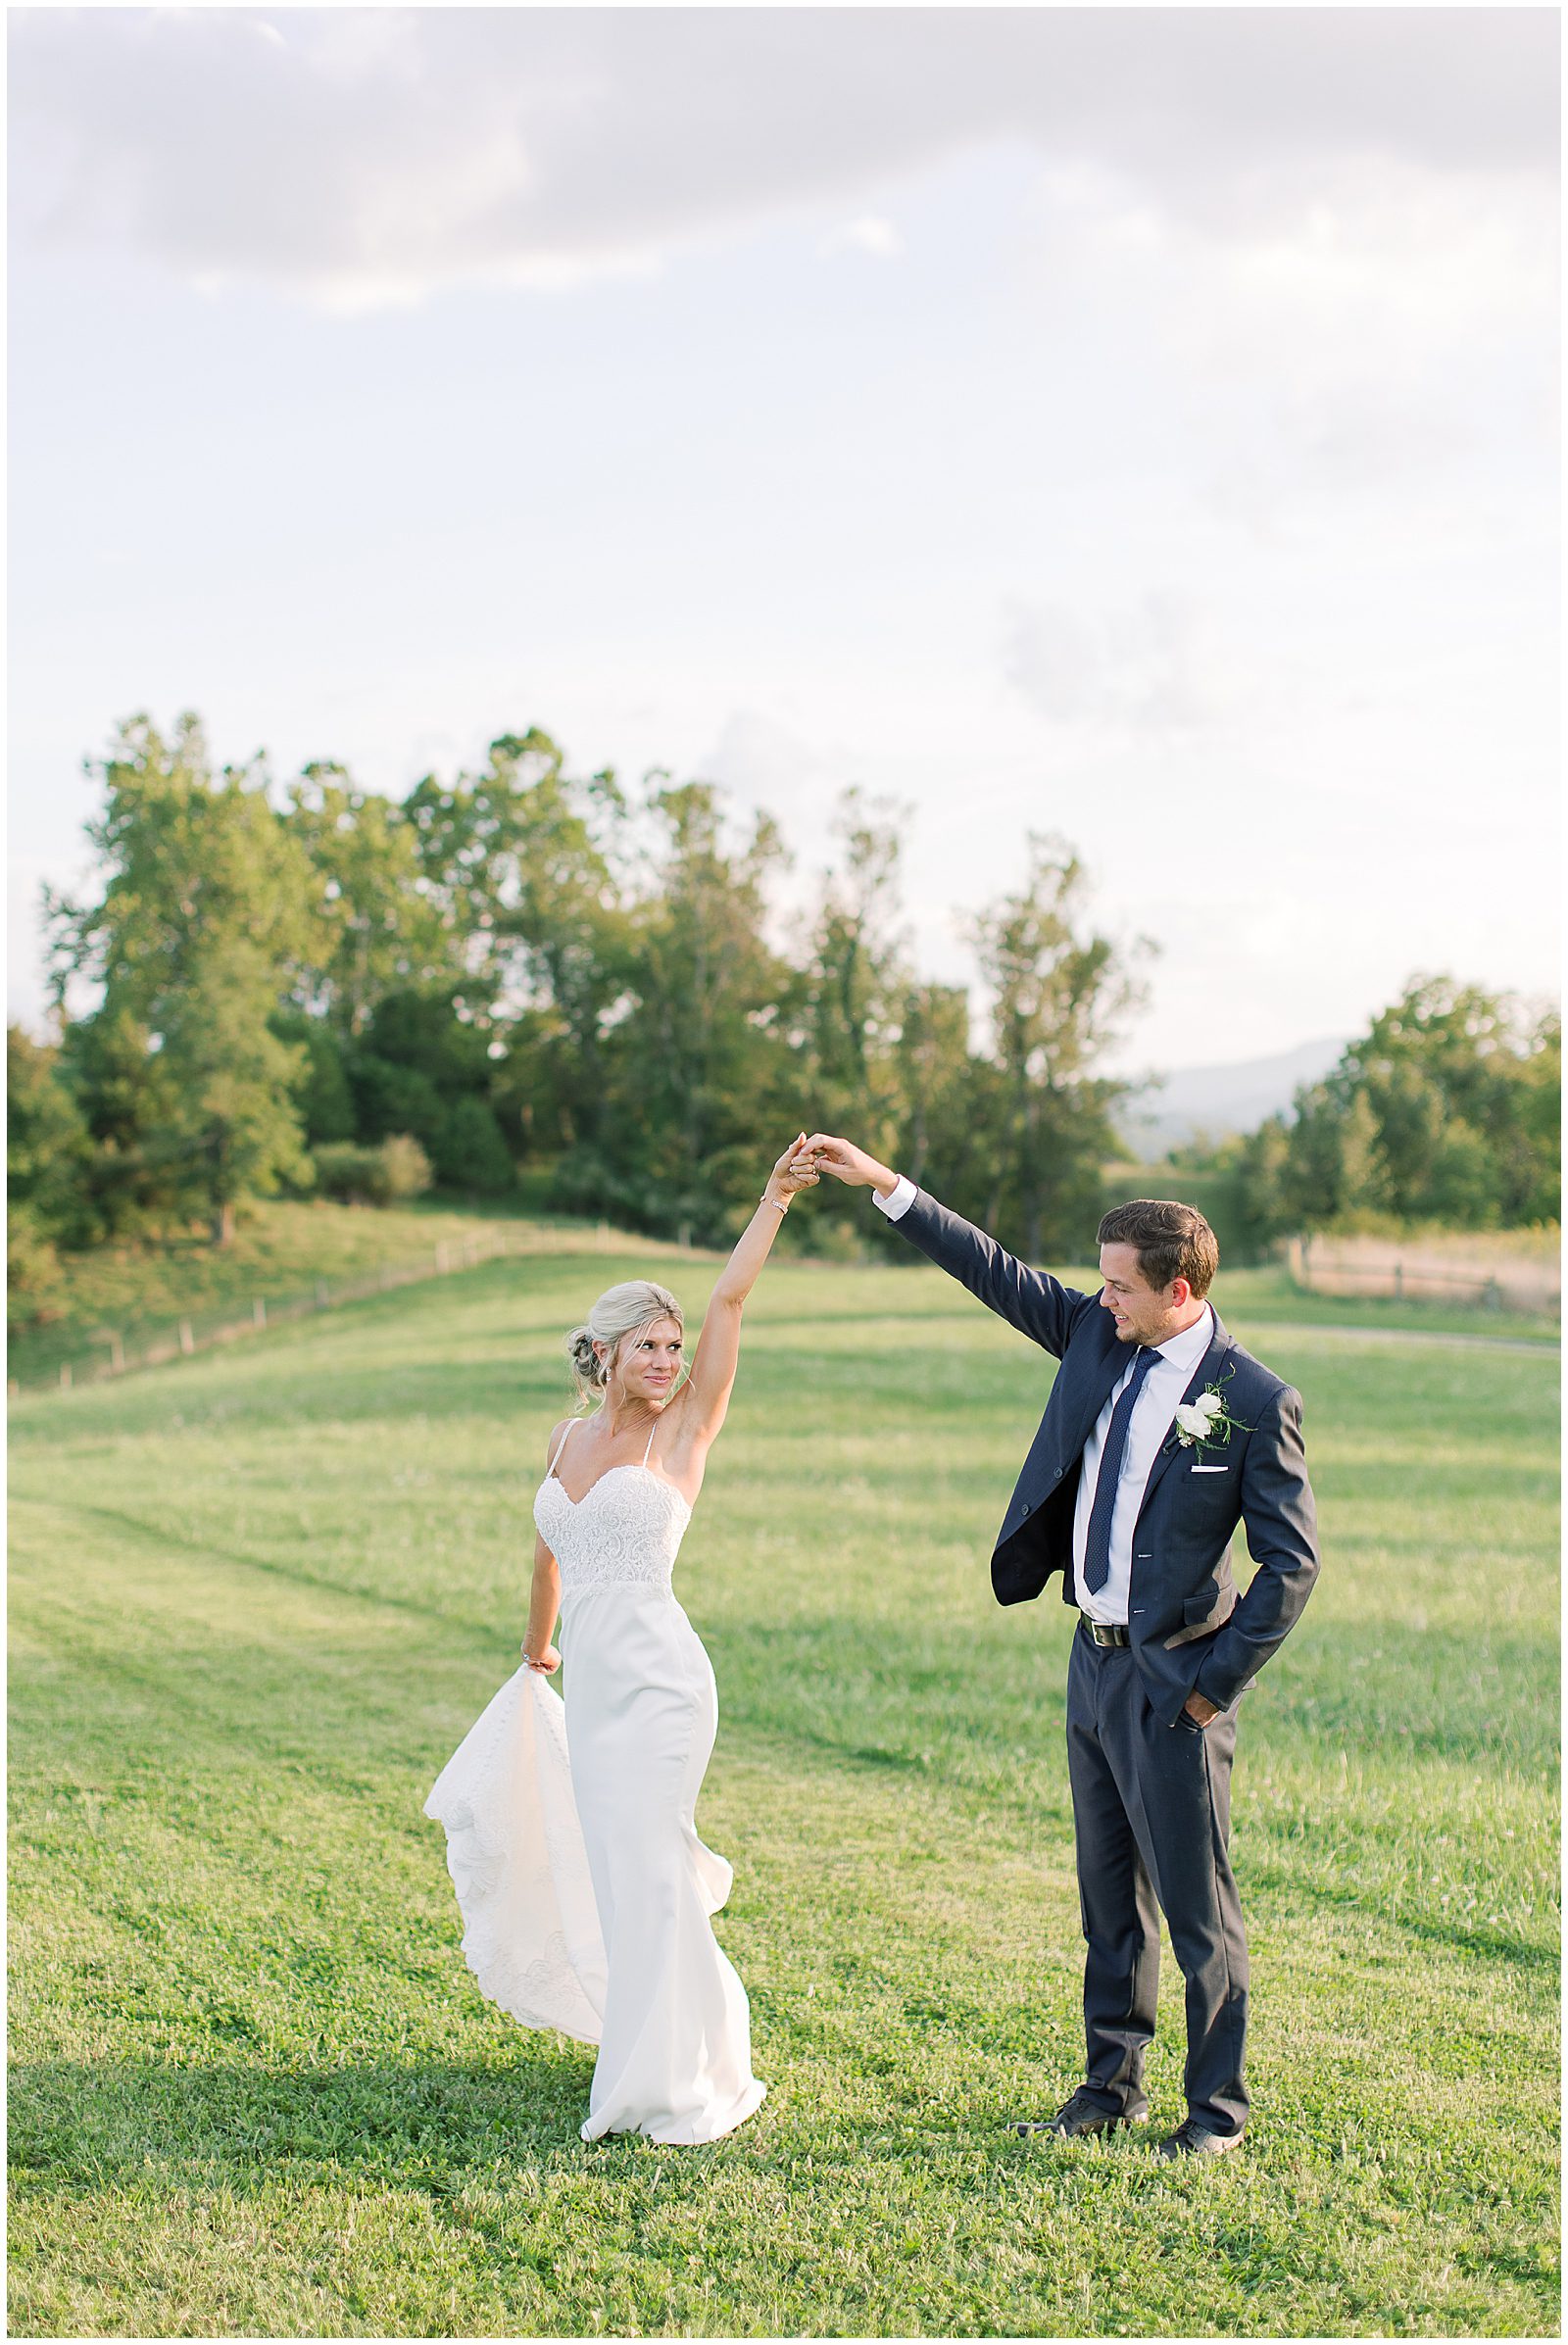 Bride and Groom Twirling In Field Photo